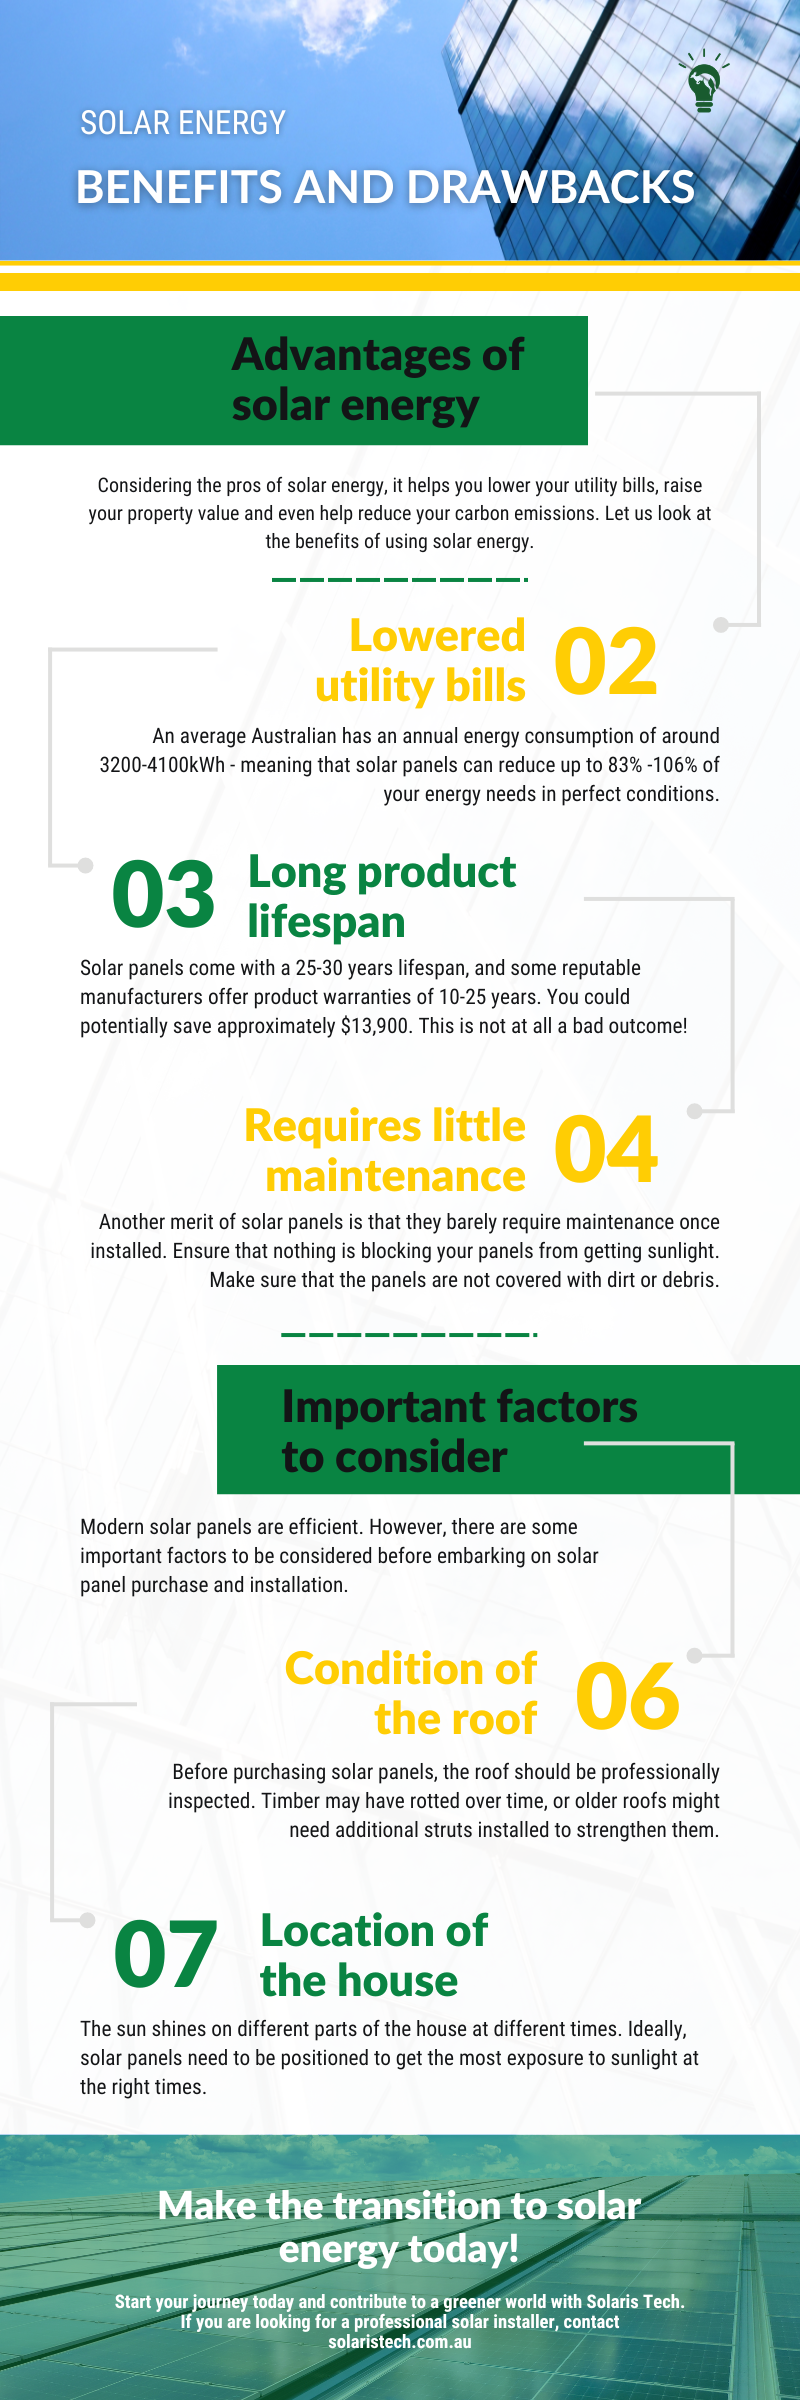 solar energy pros and cons infographic